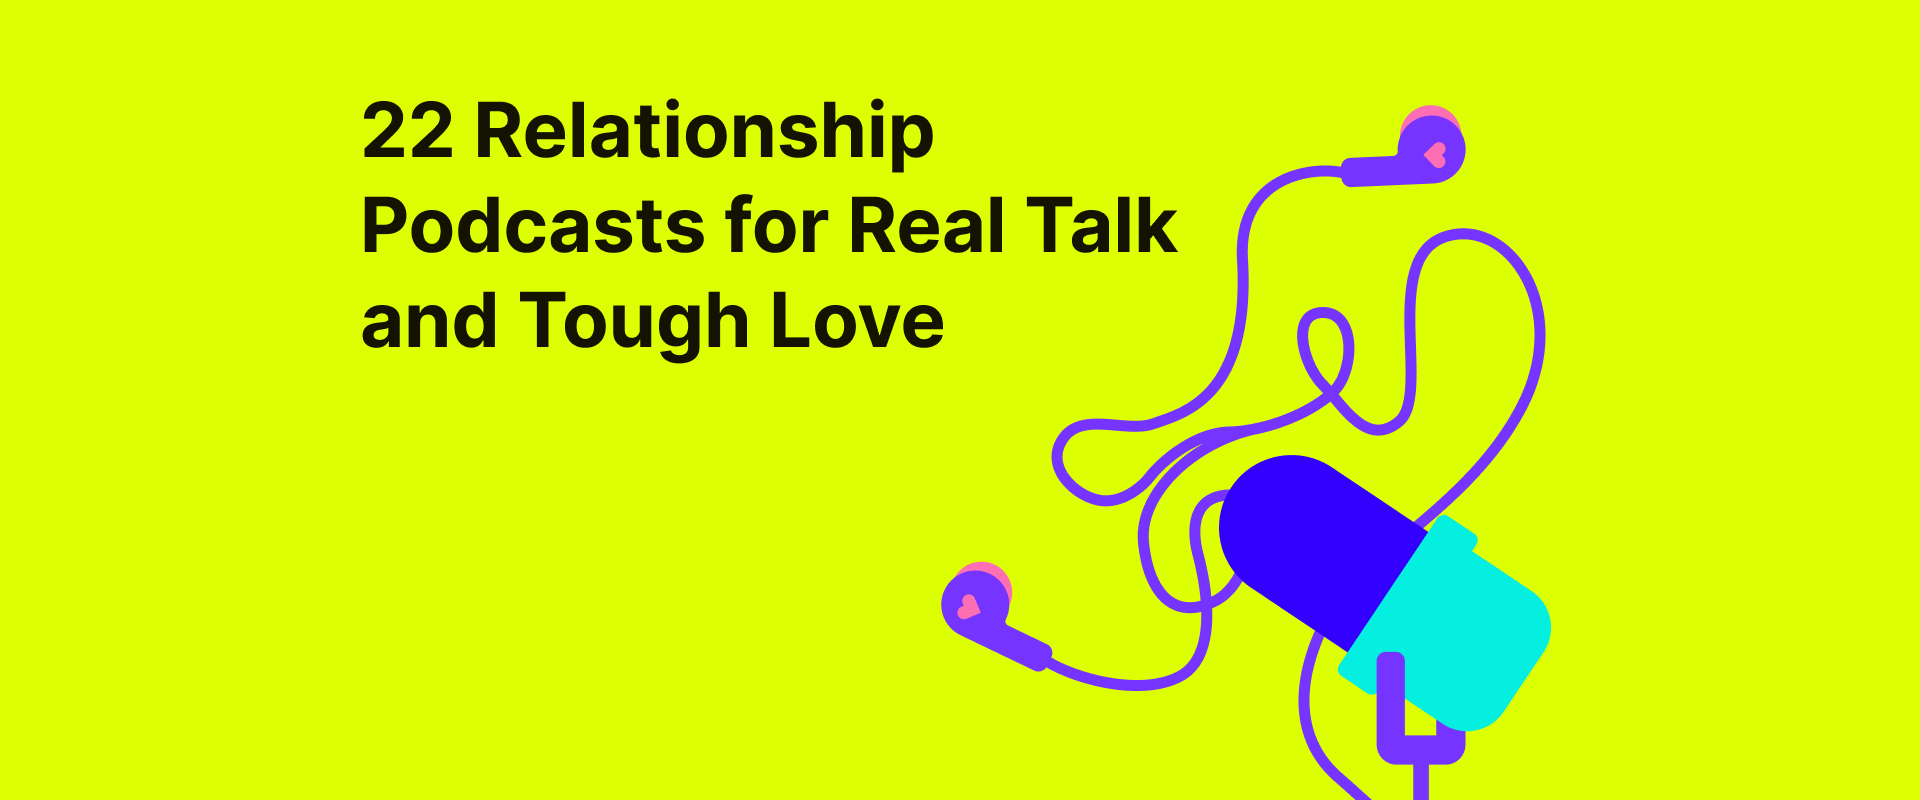 22 Relationship Podcasts for real talk and tough love